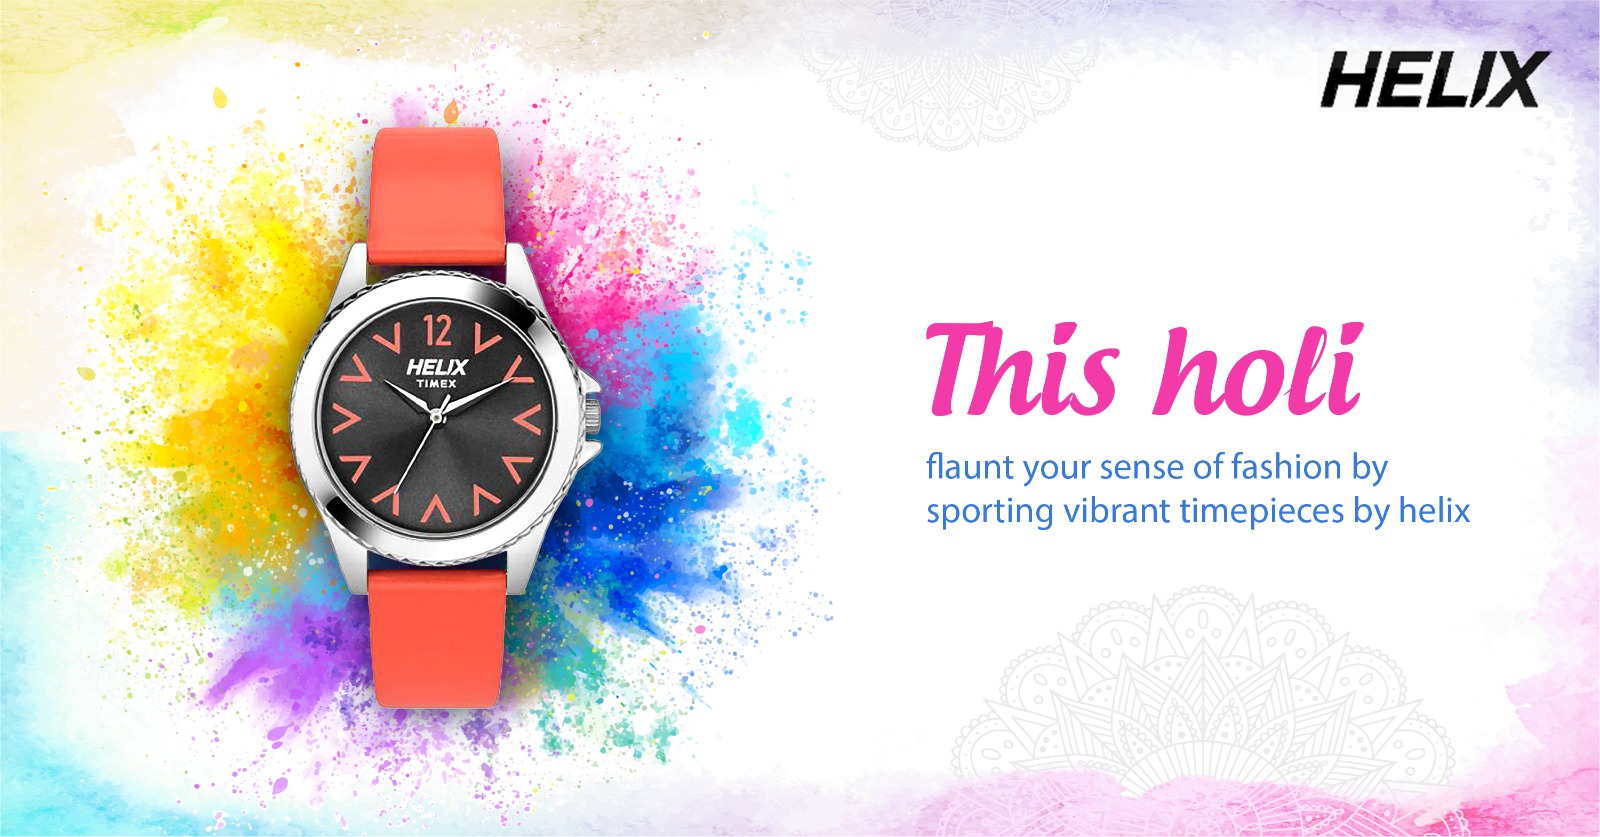 THIS HOLI FLAUNT YOUR SENSE OF FASHION BY SPORTING VIBRANT TIMEPIECES BY HELIX